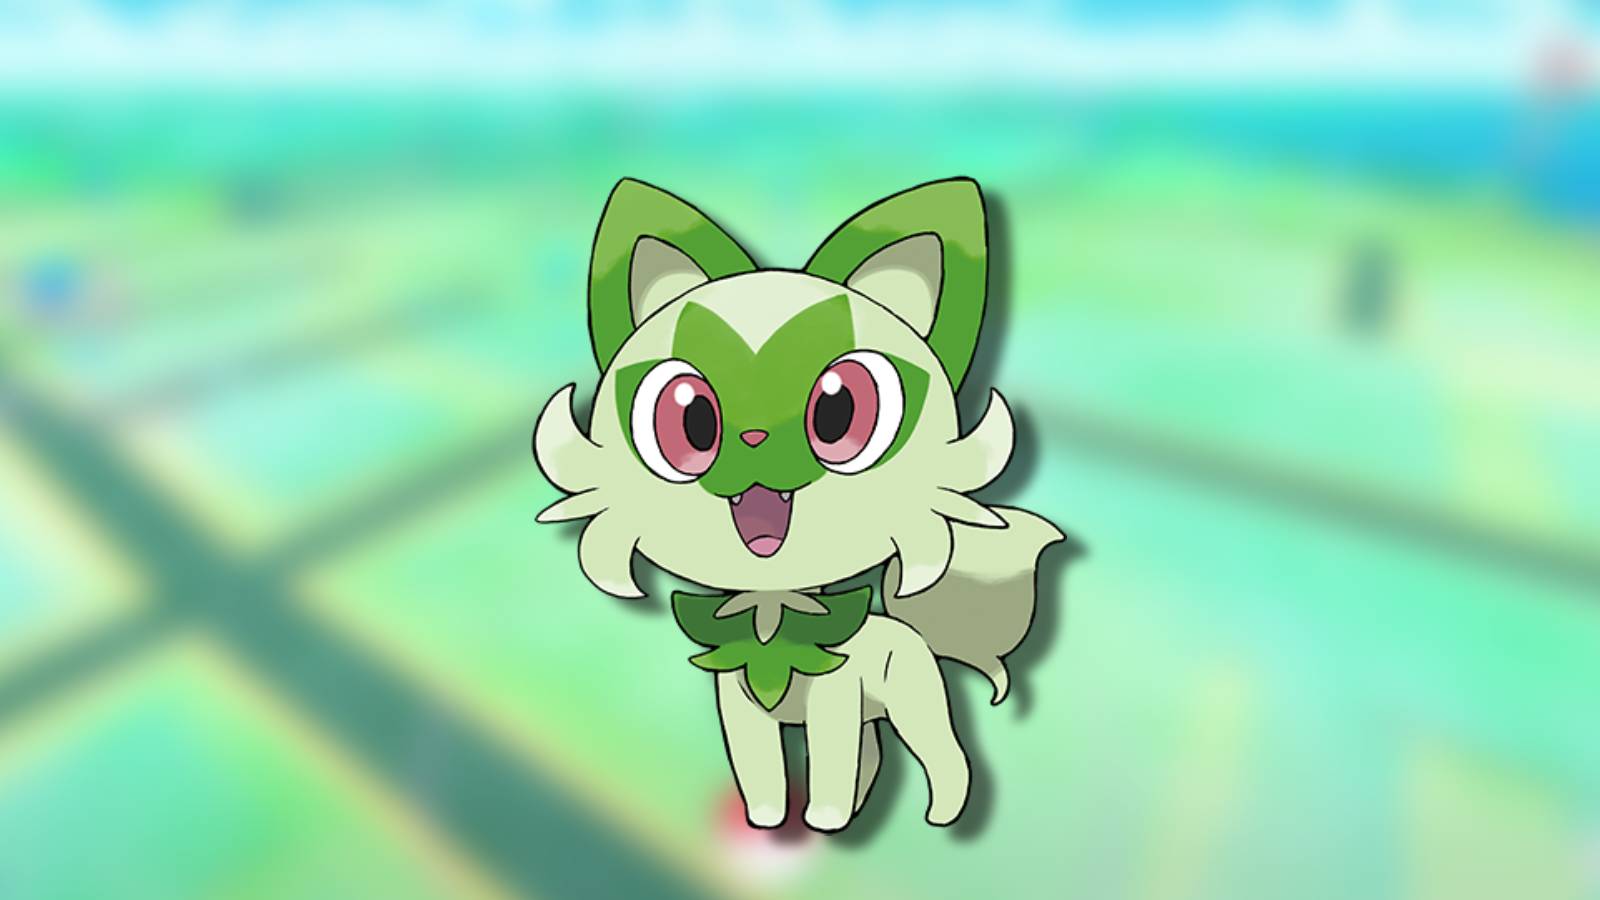 The grass cat POkemon Sprigatito appears against a blurred background of Pokemon Go gameplay